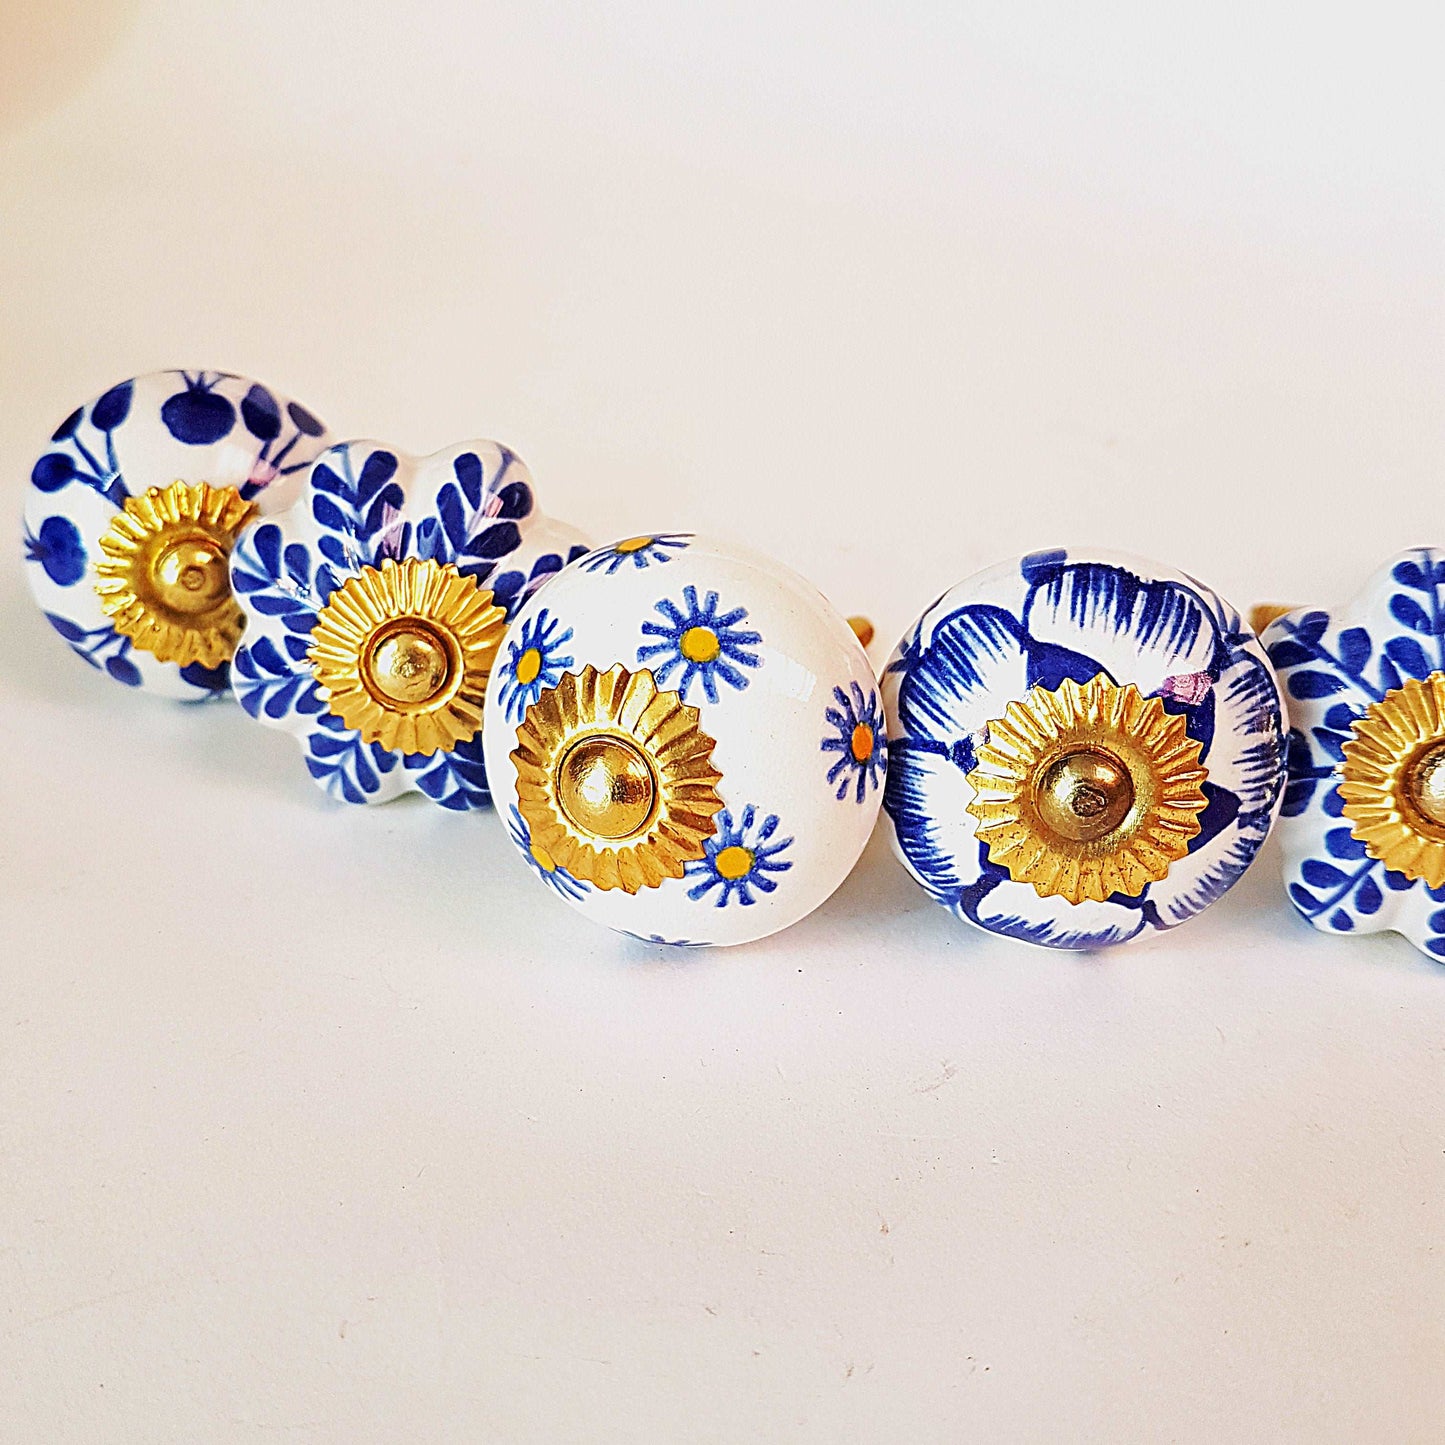 8 Delft blue cupboard knobs, ceramic hand painted, for cabinets, furniture and home decorating. Antique vintage drawer pulls. 1.5 inches.